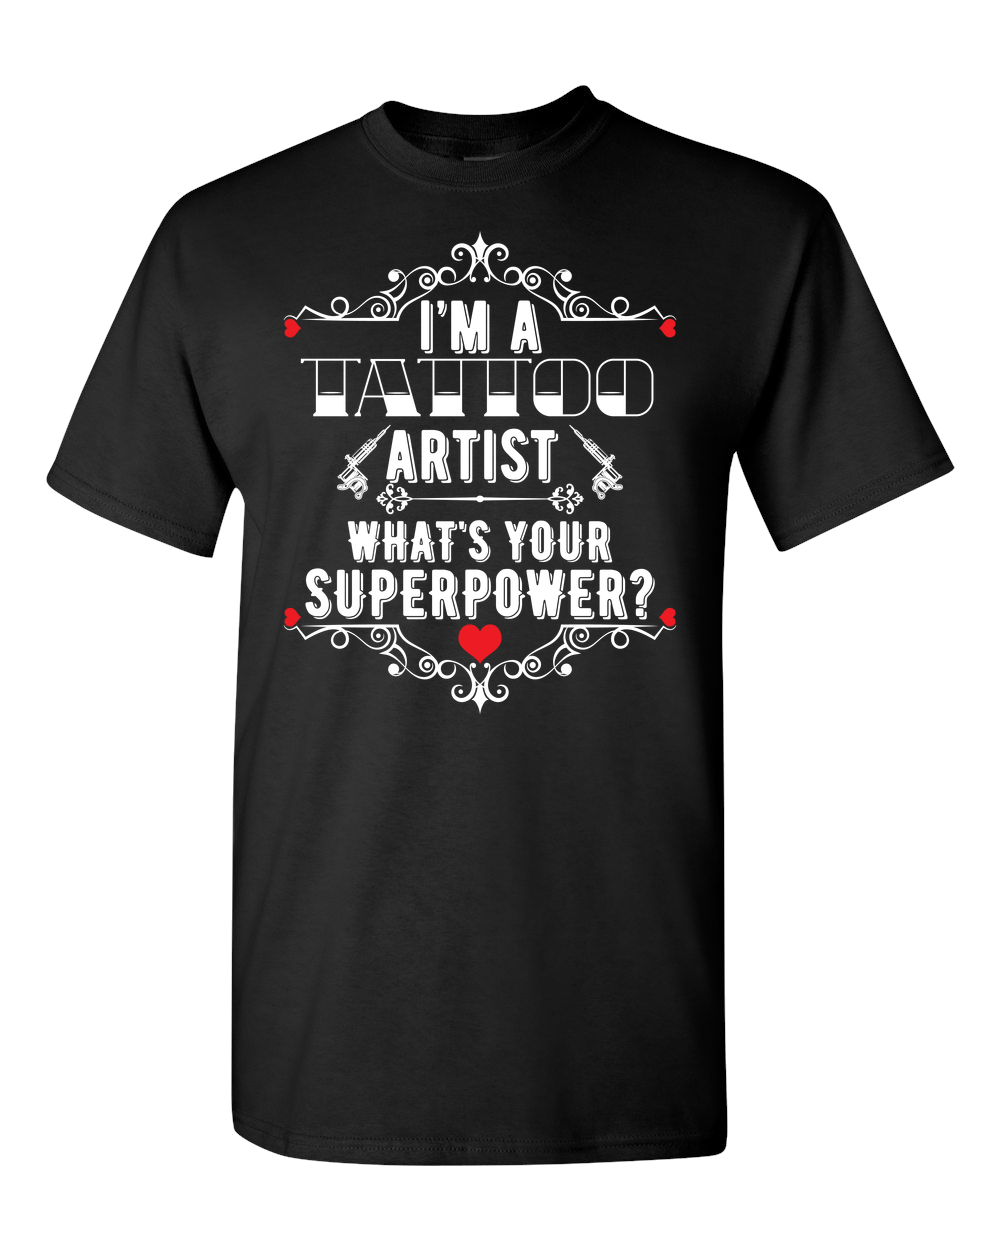 Tattoo Artist What's Your Superpower? Adult Unisex T-Shirt